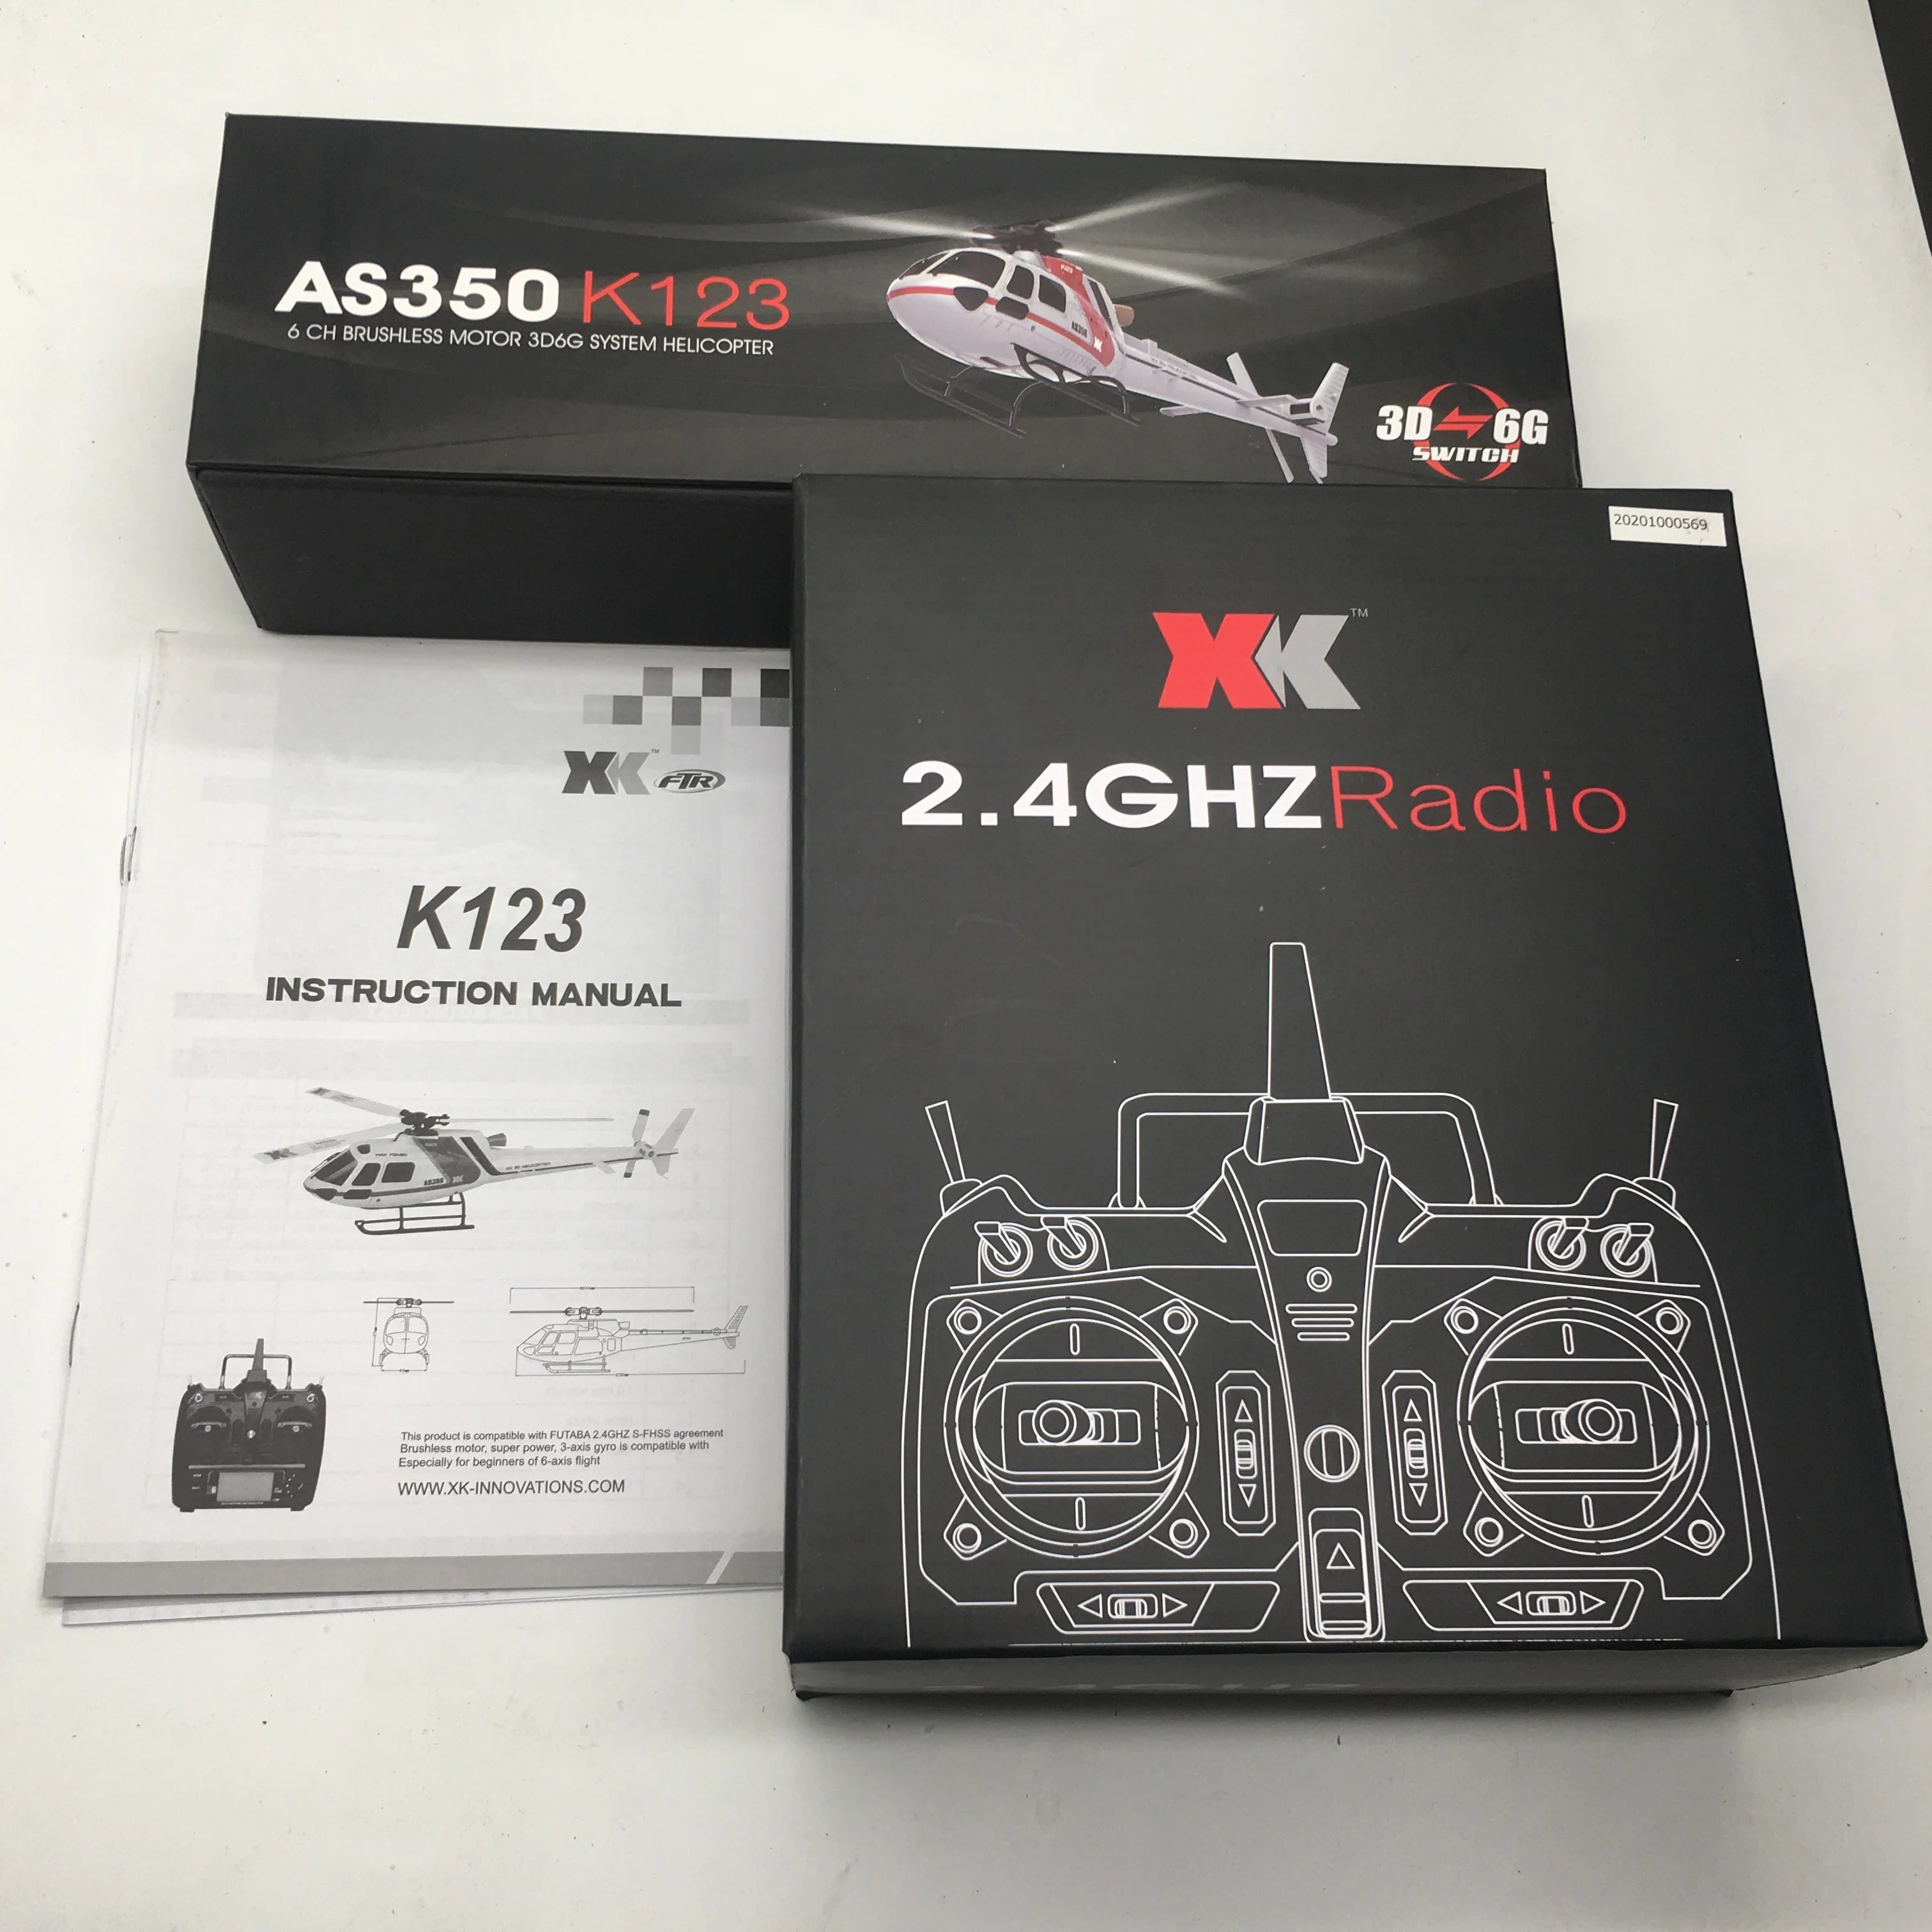 WLtoys XK K123 RC Helicopter, Especially for beginners of 6-axis flight WWWXK-INNOVATIONS.